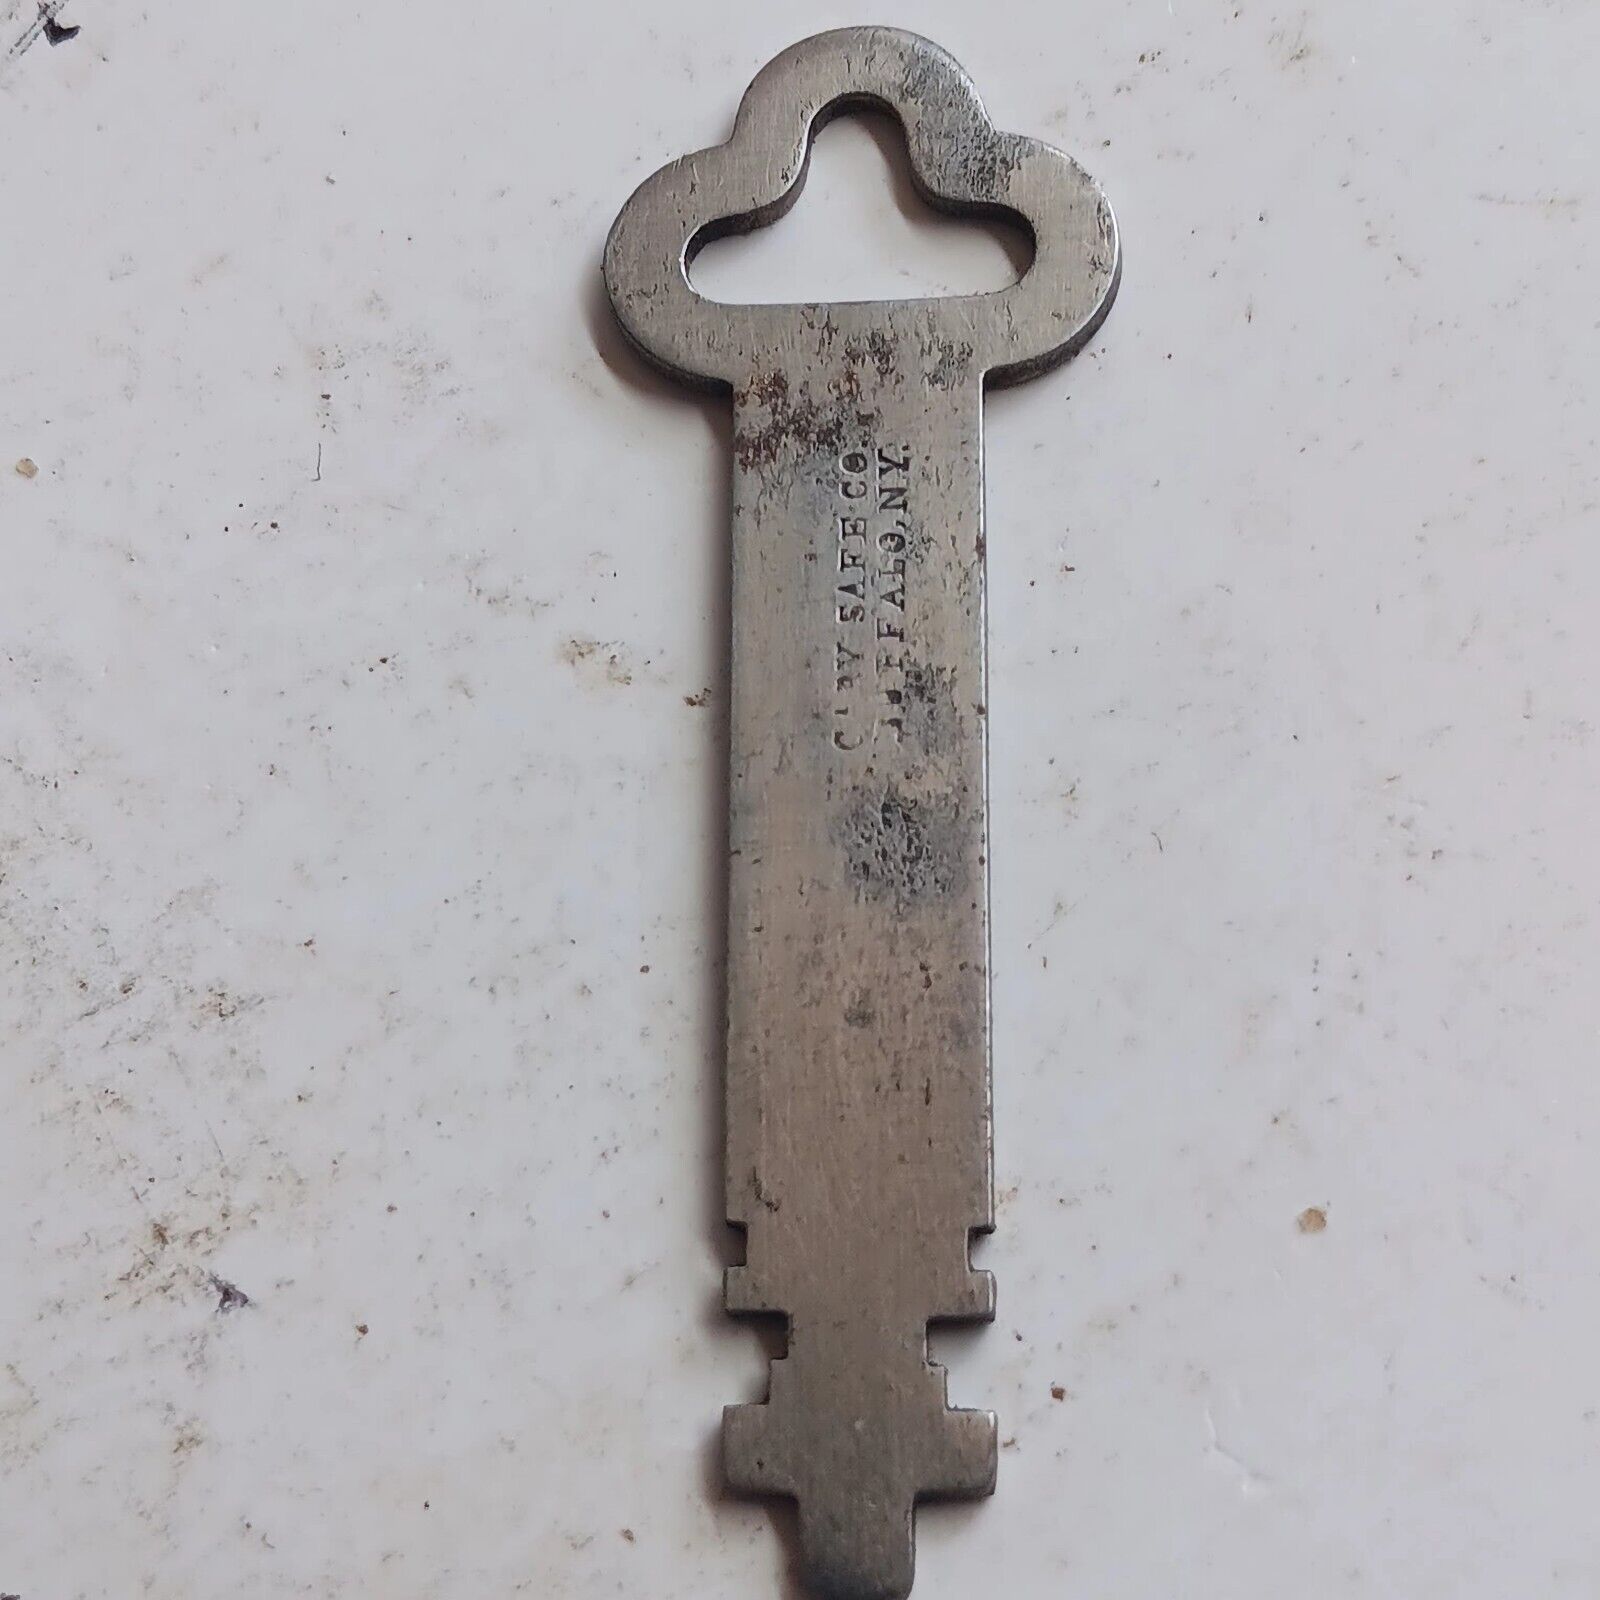 A Vintage Cary Safe Company Key #40 . A Very Nice Collectable Key